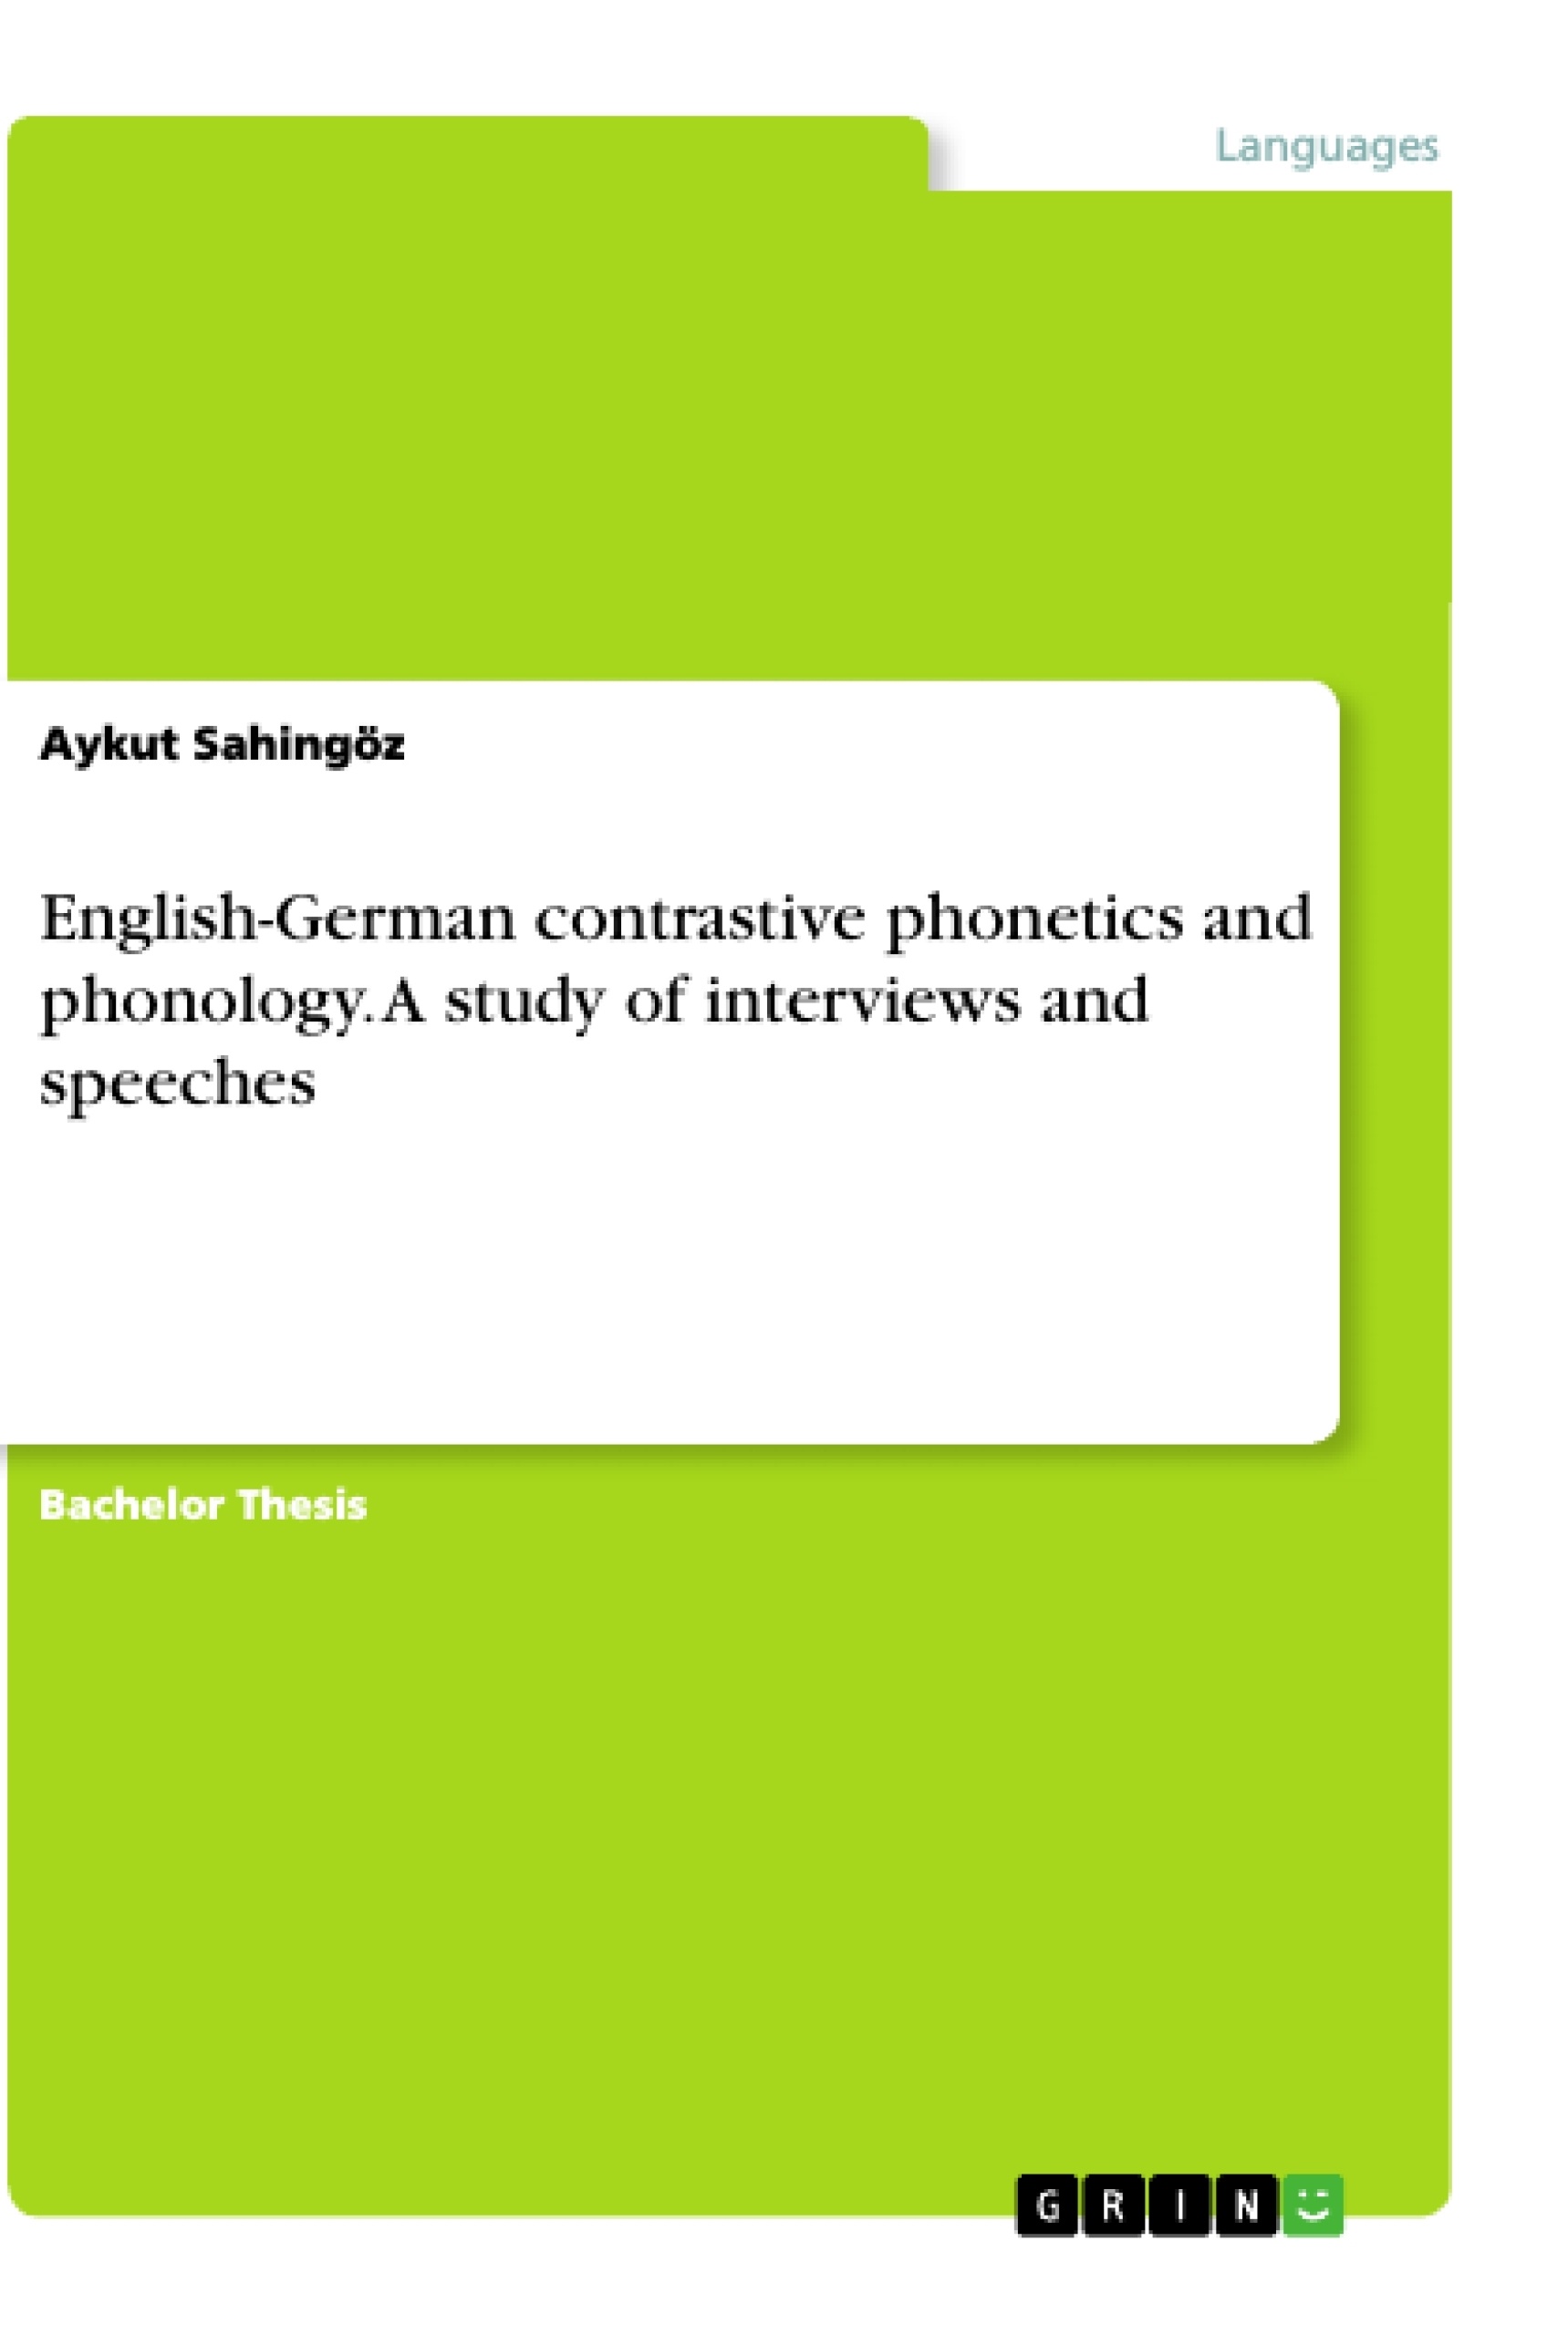 Título: English-German contrastive phonetics and phonology. A study of interviews and speeches